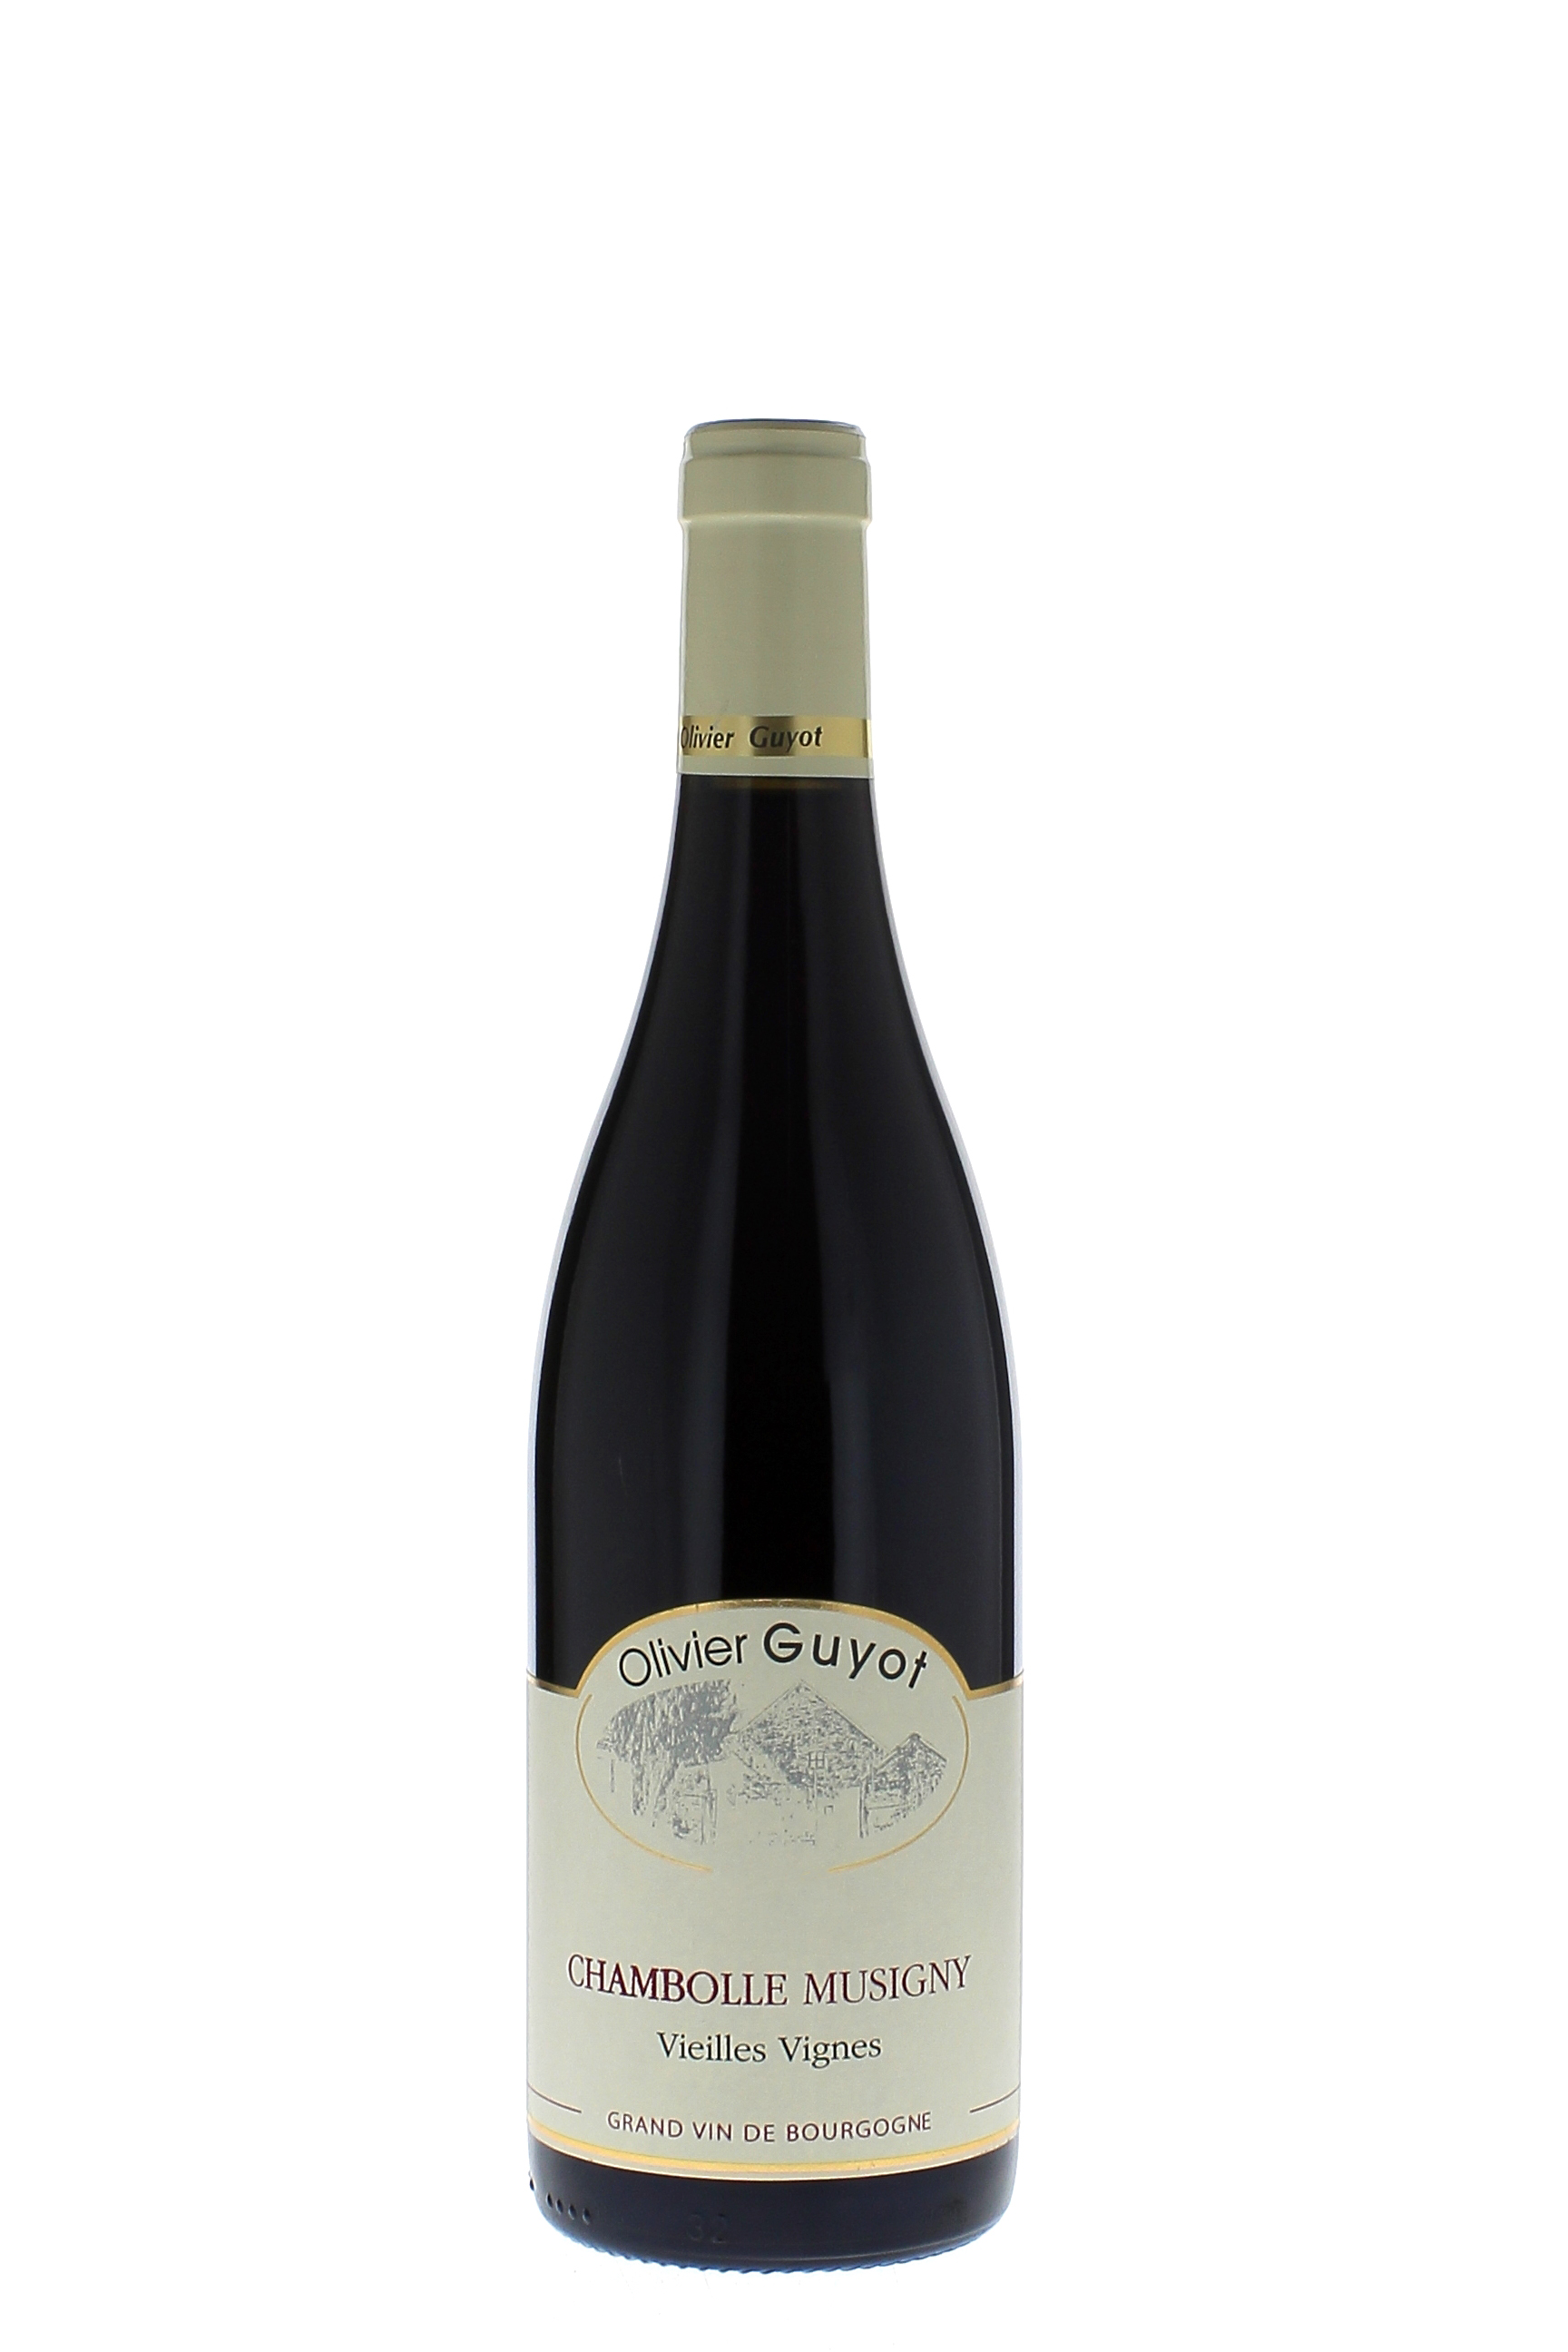 Chambolle musigny vieilles vignes 2015  GUYOT Olivier, Bourgogne rouge